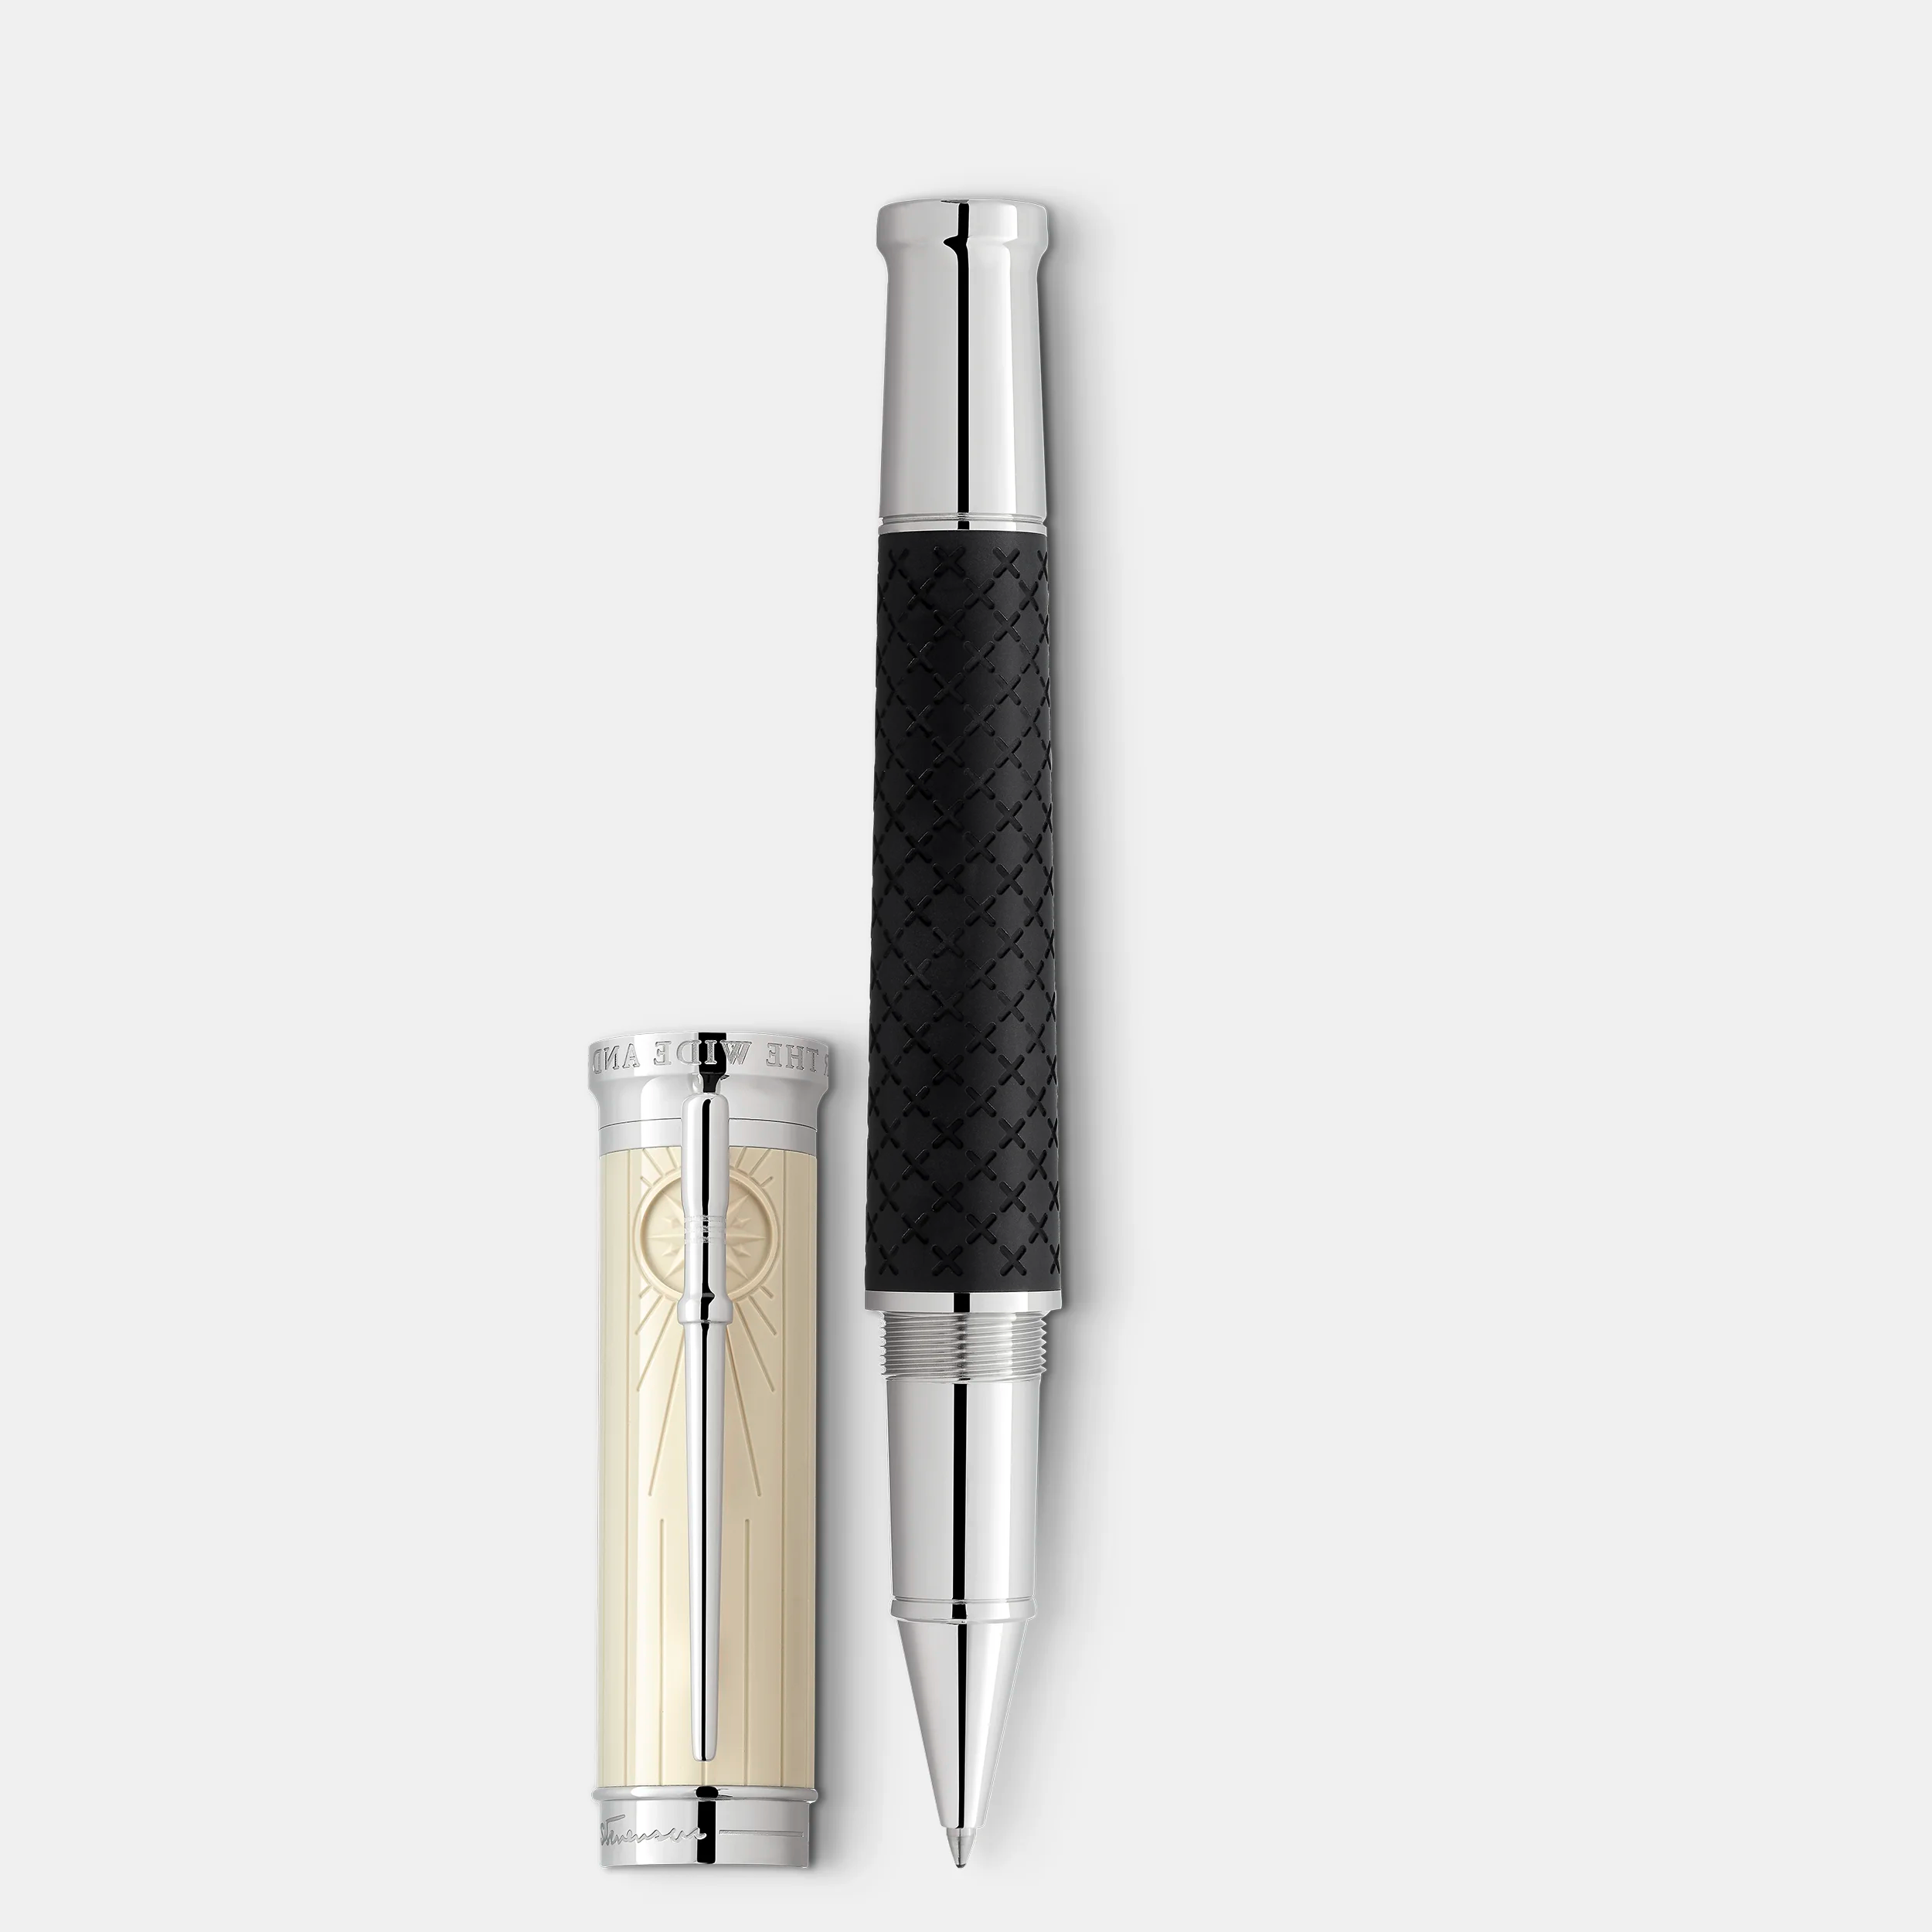 Montblanc Writers Edition Homage to Robert Louis Stevenson Limited Edition Rollerball - Pencraft the boutique